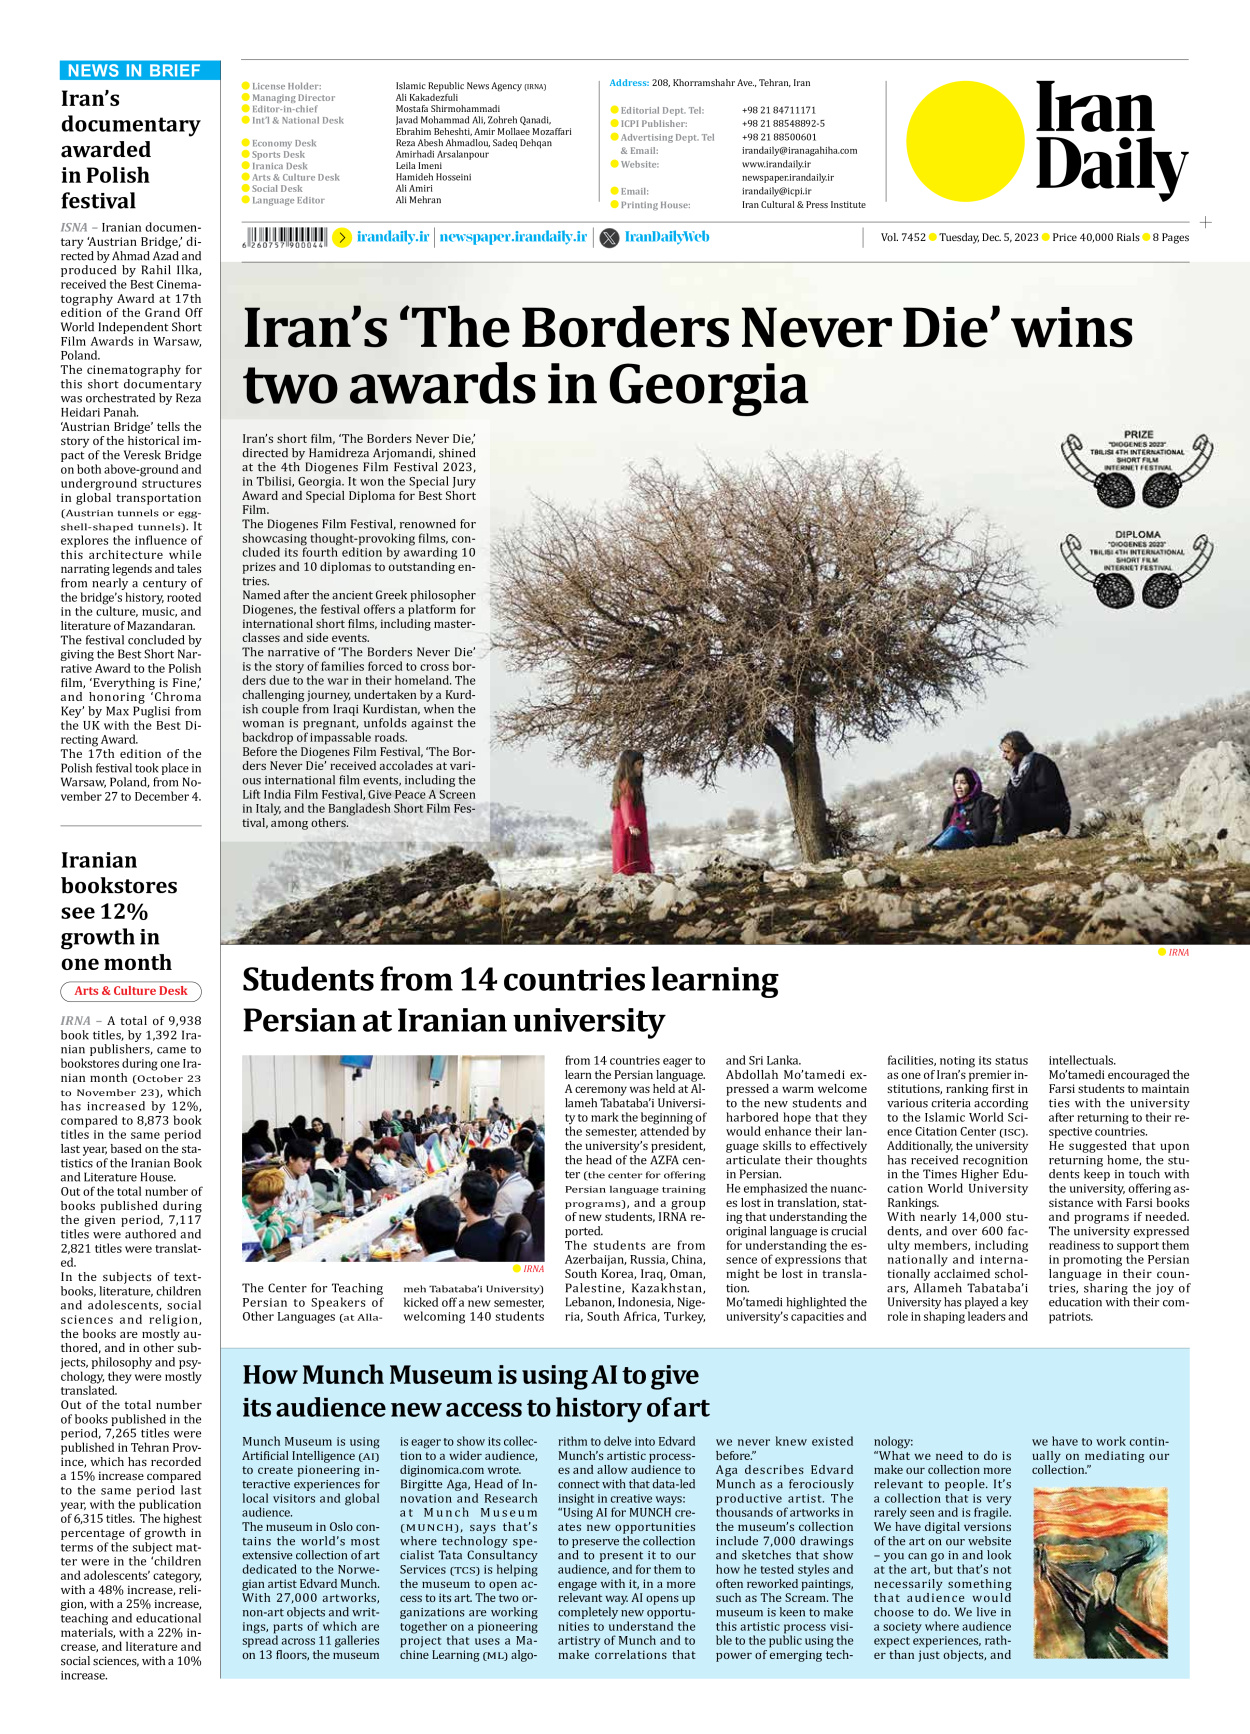 Iran Daily - Number Seven Thousand Four Hundred and Fifty Two - 05 December 2023 - Page 8